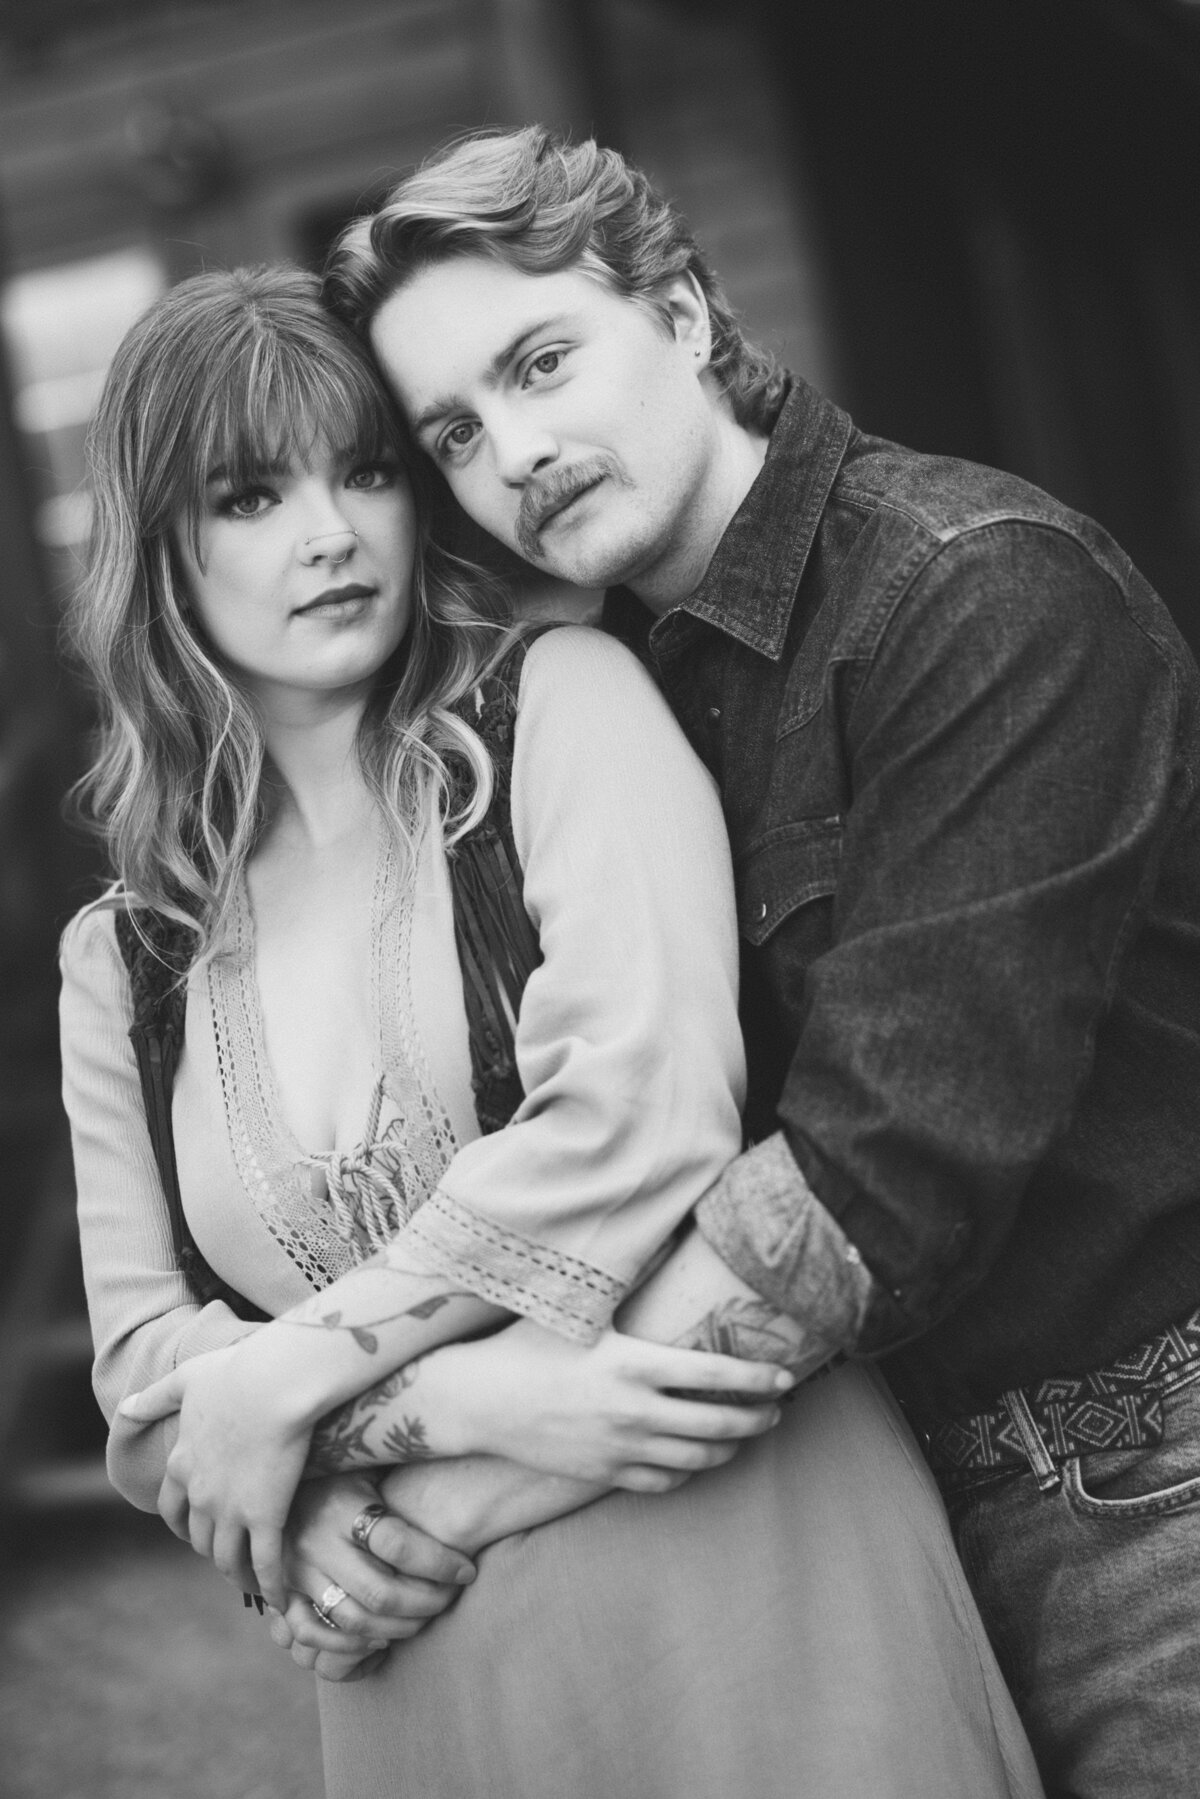 vpc-couples-vintage-cabin-shoot-16